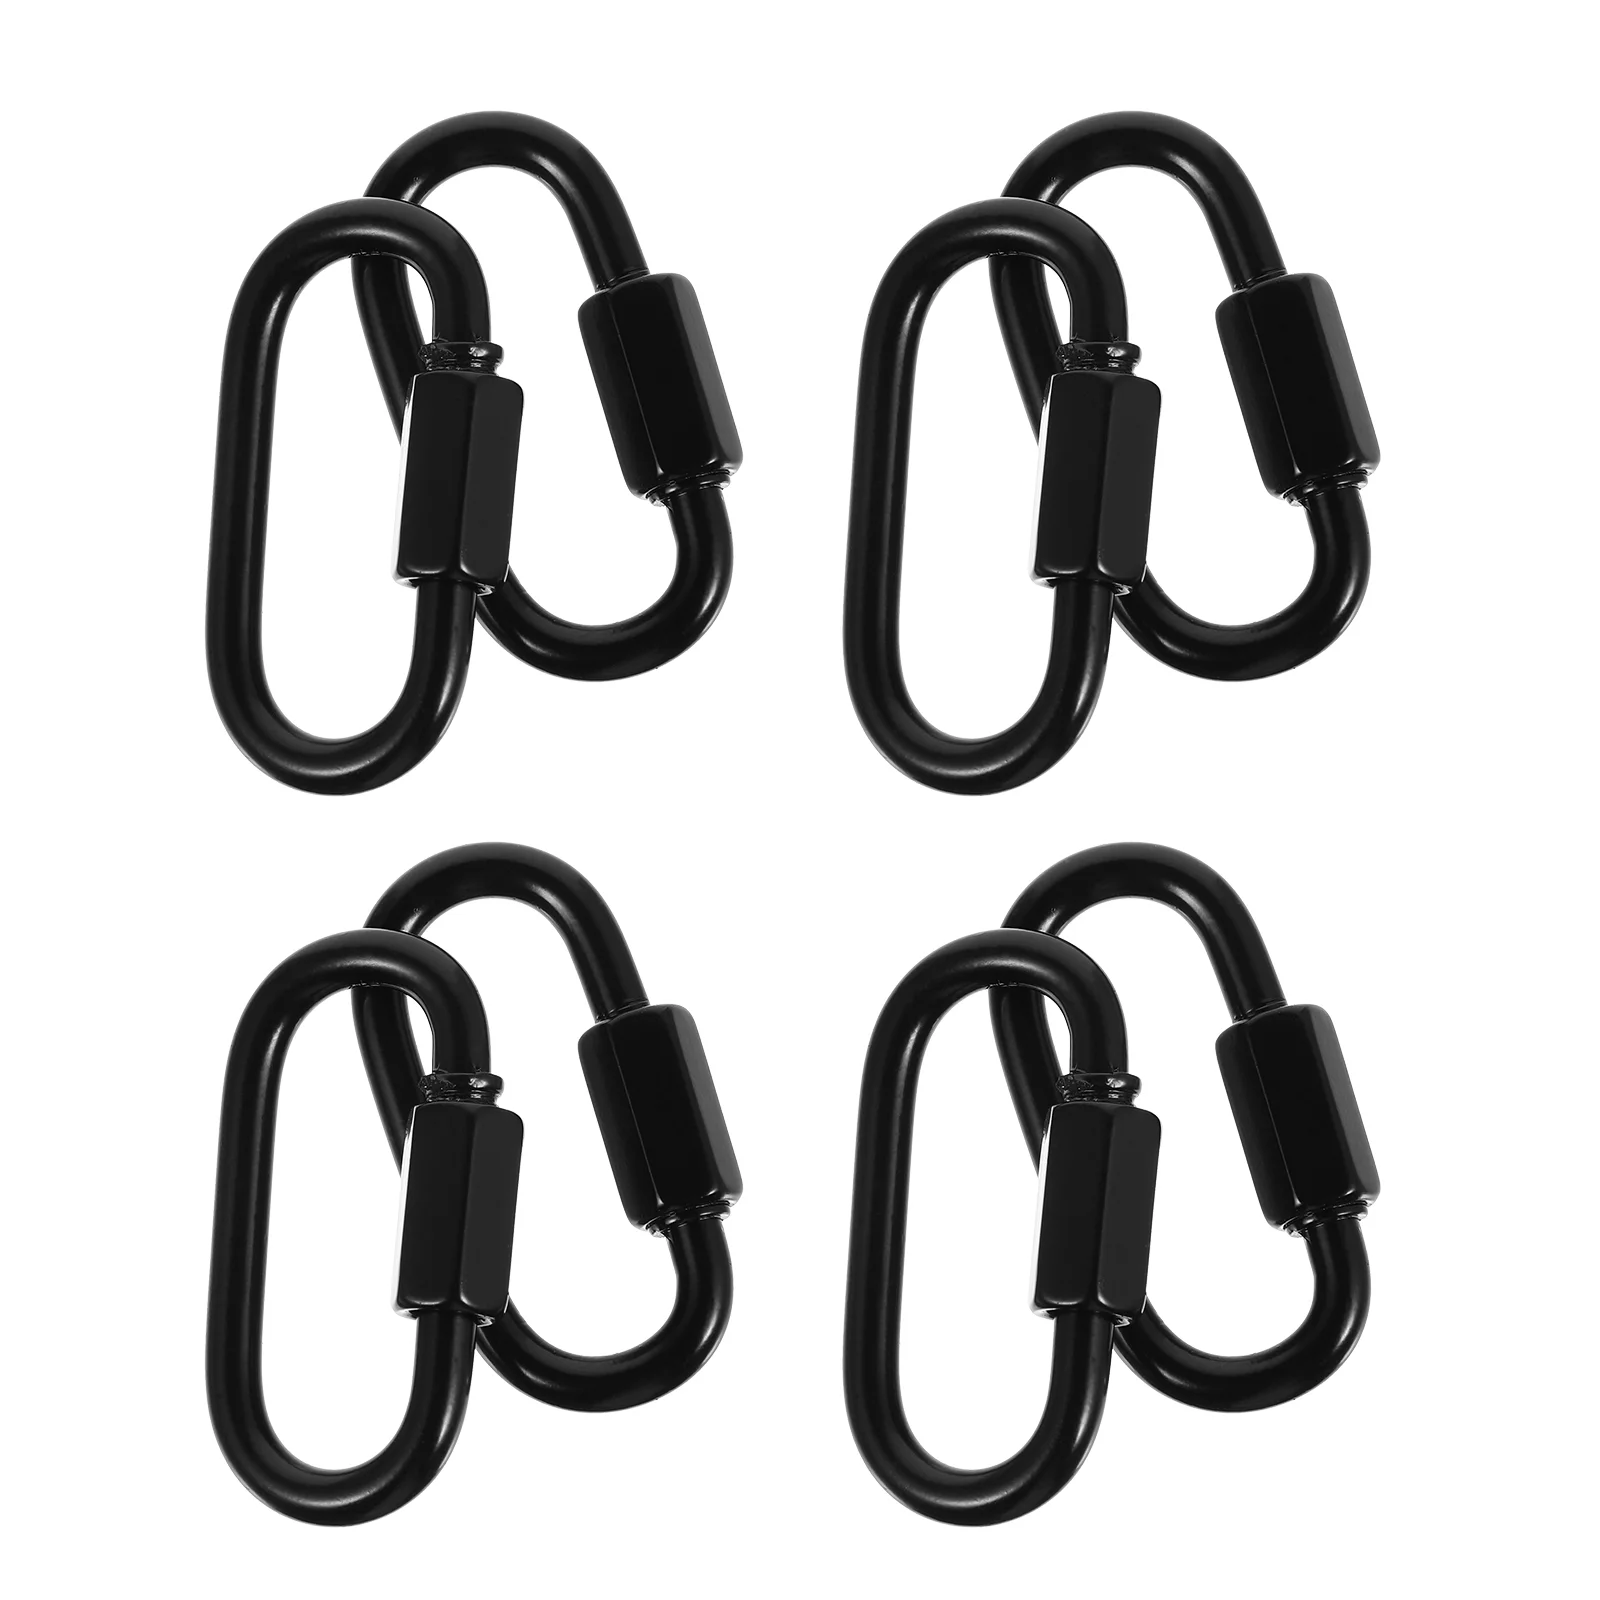 8 Pcs Carabiner Lifting Hooks Rope Quick Link Connector Chain Links Spring Trailer Connectors Safety Locking Iron цена и фото